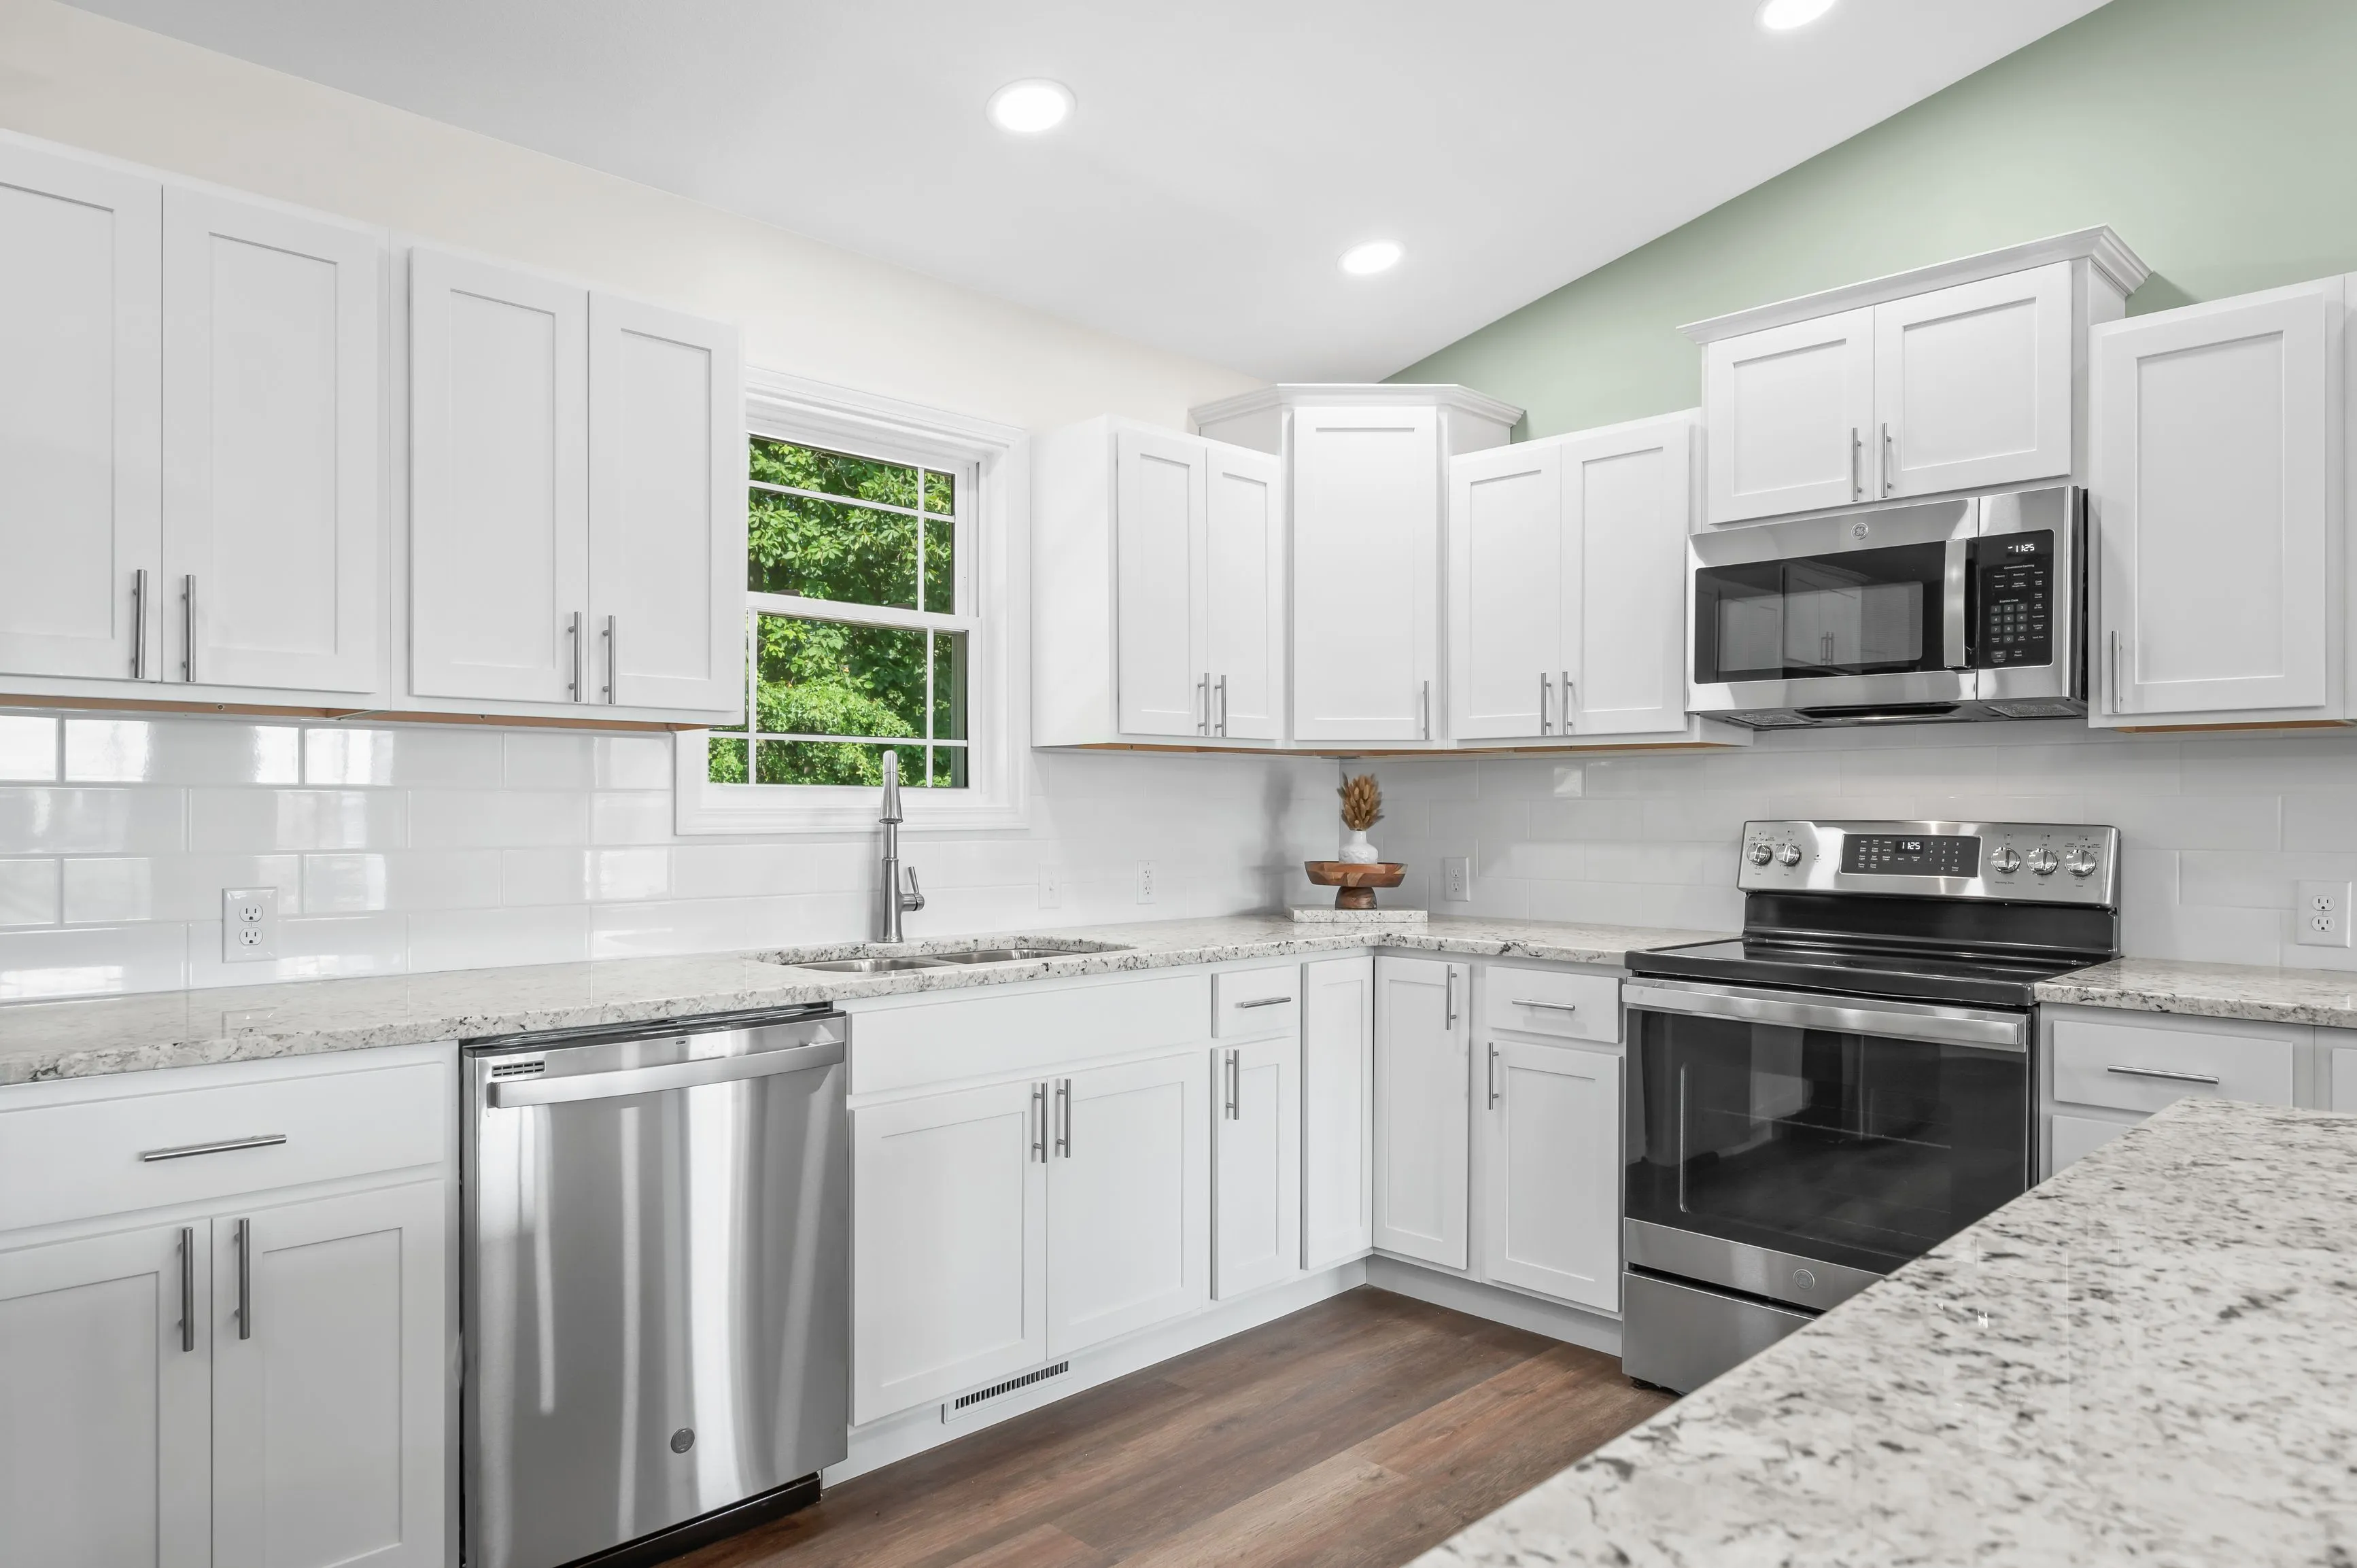 A modern kitchen interior with white cabinetry, stainless steel appliances, granite countertops, subway tile backsplash, and hardwood floors, with a view of greenery through a window.